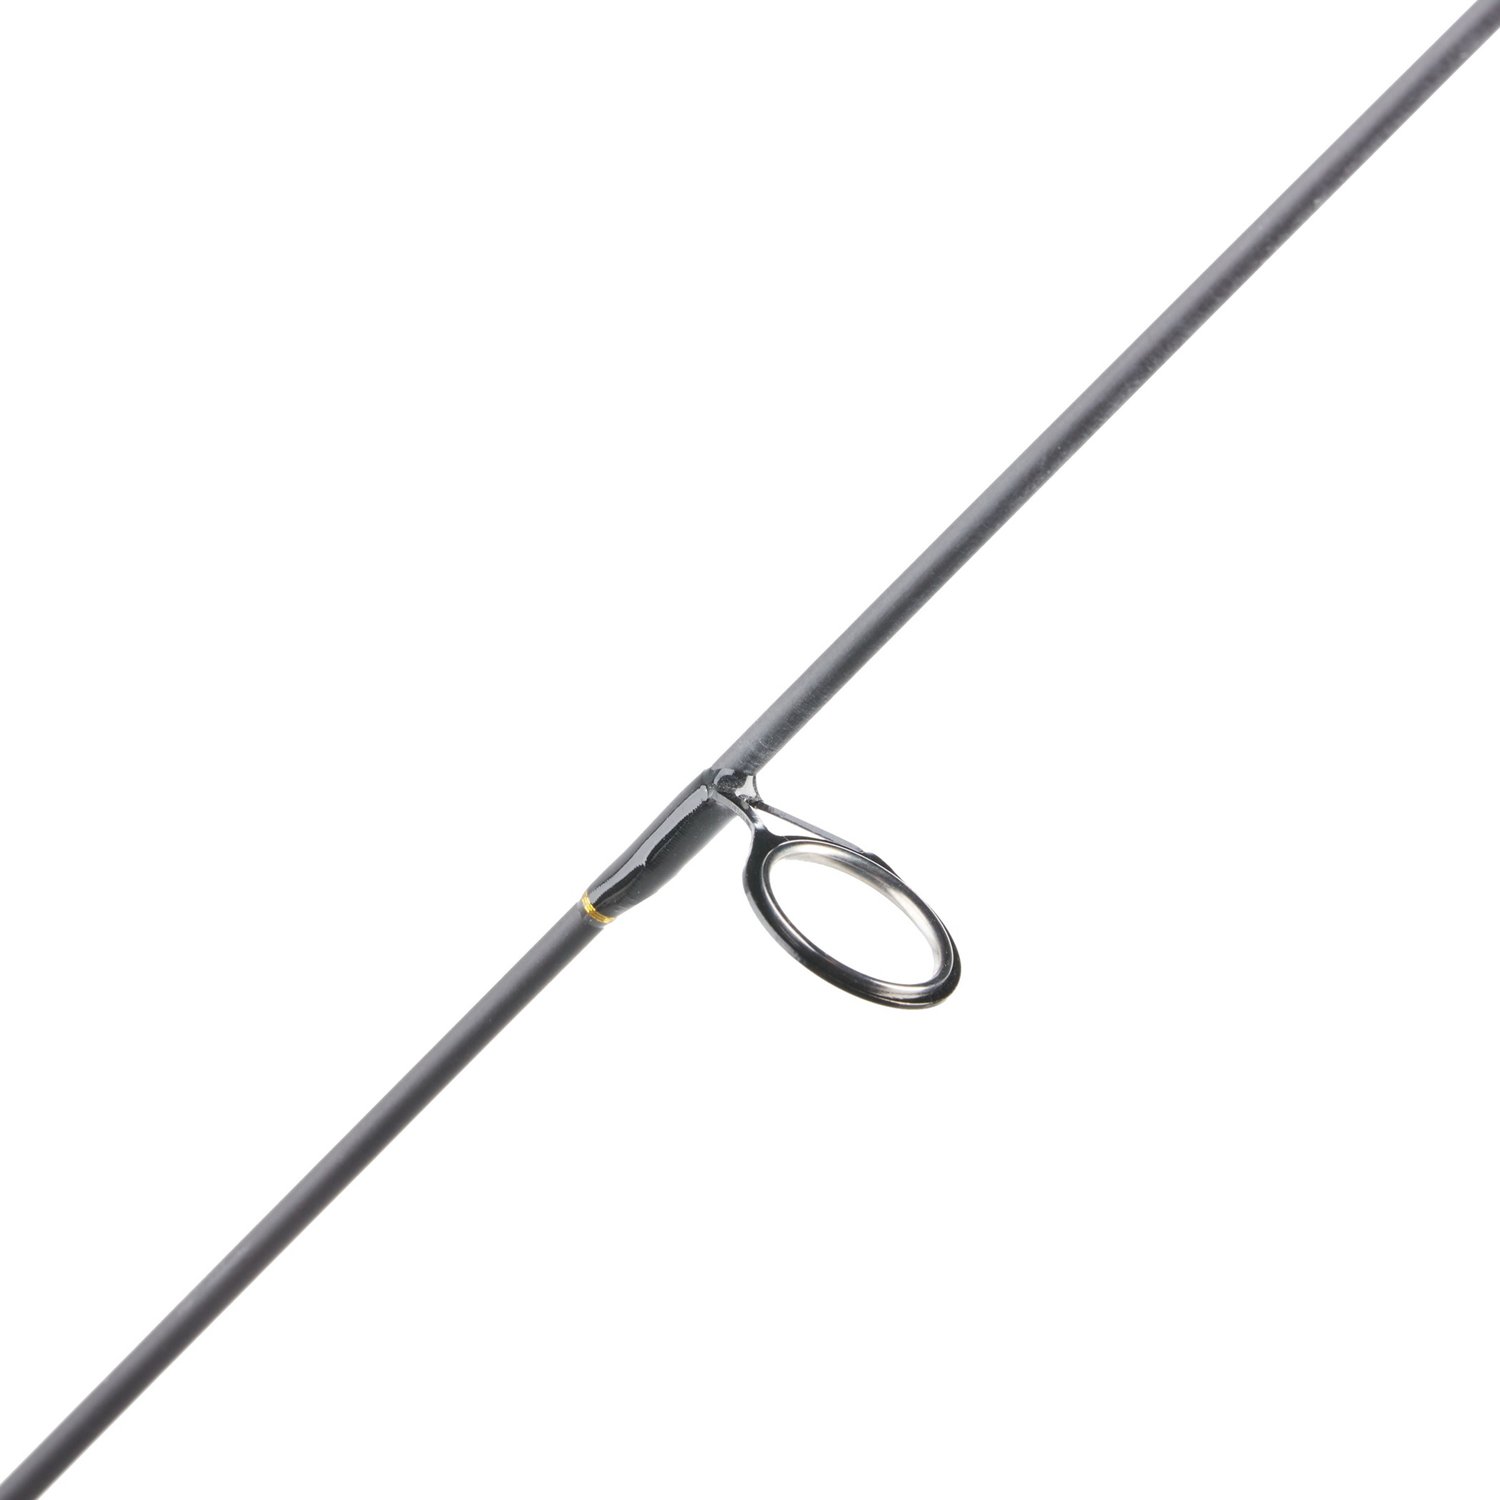 H2O XPRESS Tiny Ultralight Spinning Rod and Reel Kit